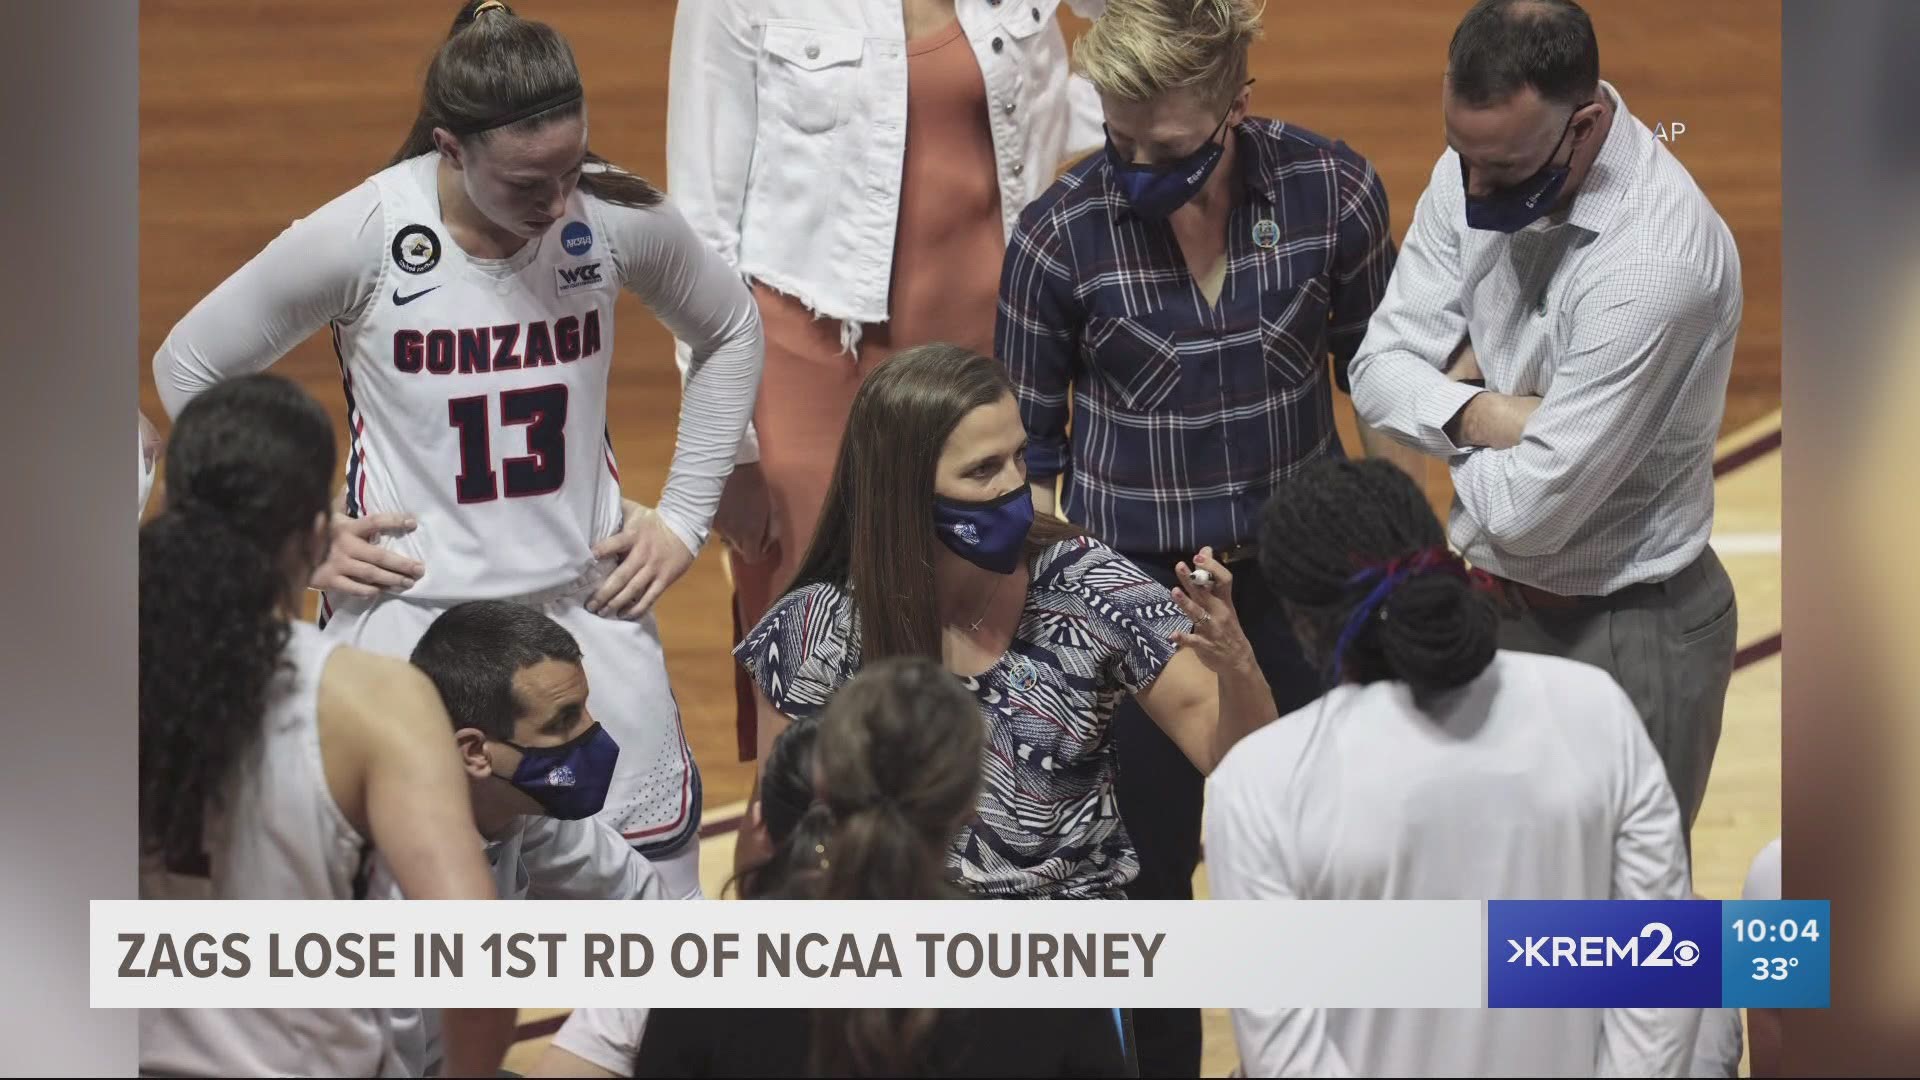 This marks #12 Belmont's first-ever win in the NCAA Tournament. Gonzaga finishes the season 23-4.